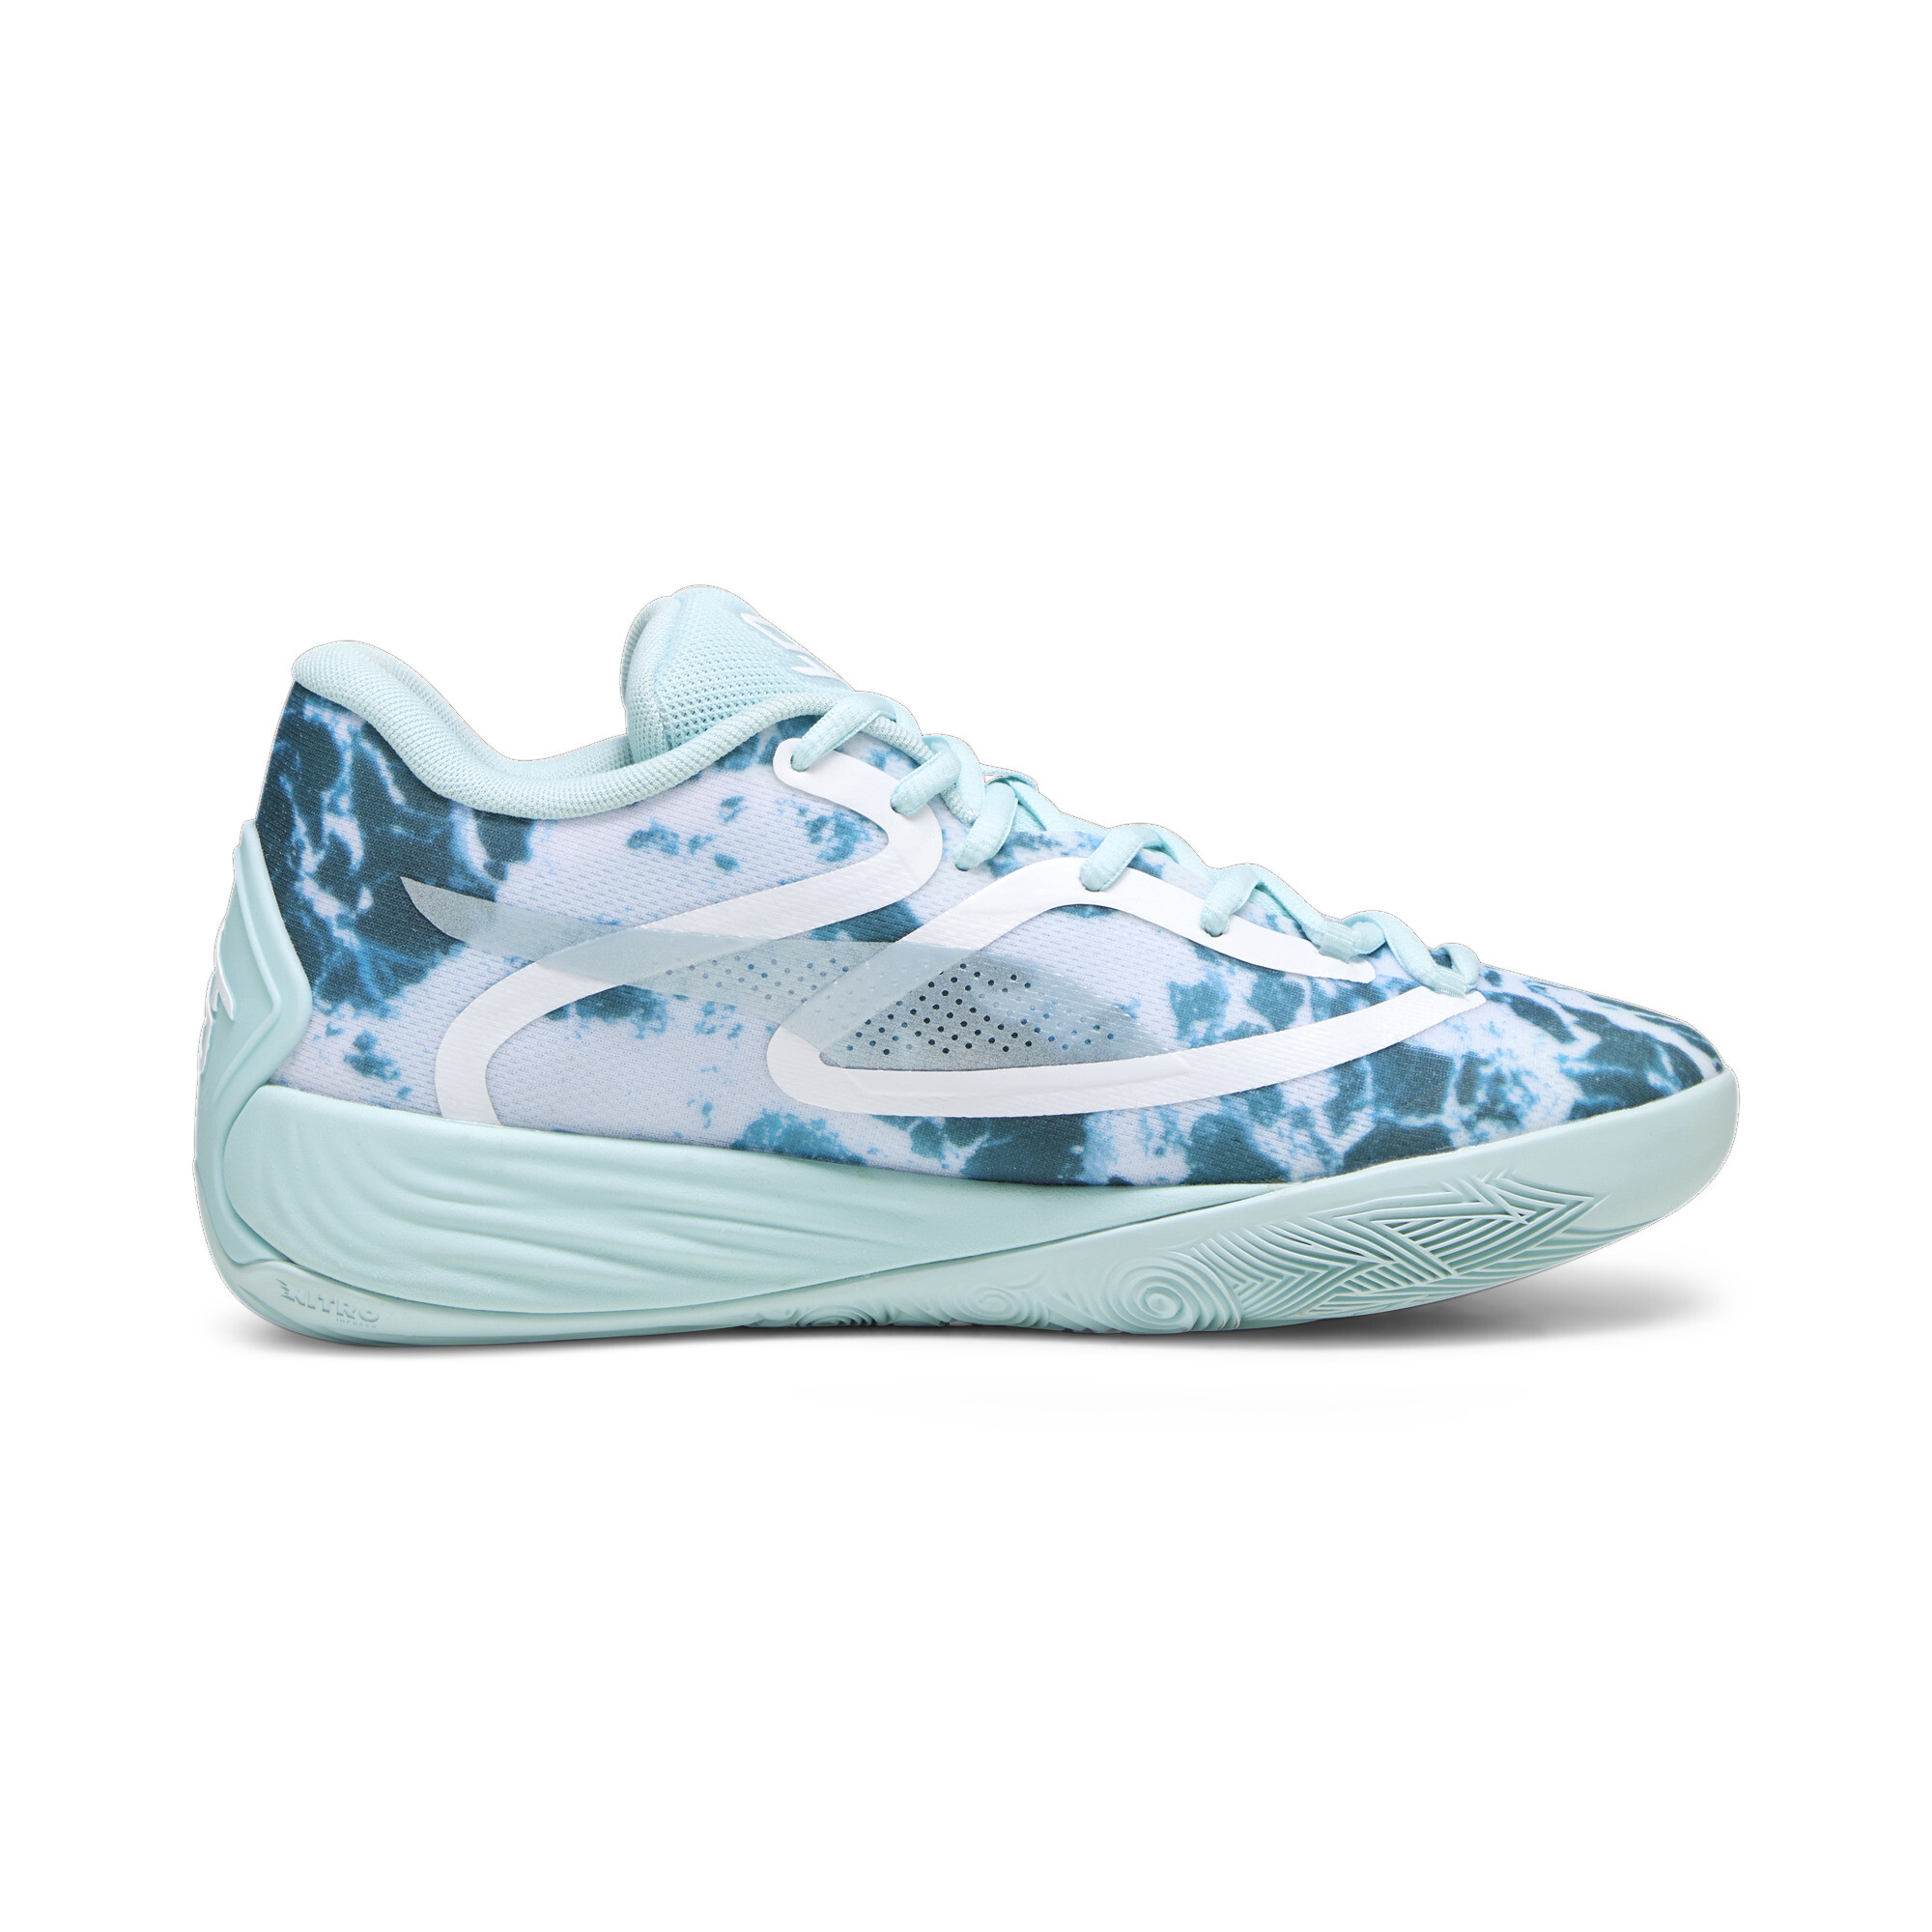 Women's Puma Stewie 2 Water's Basketball Shoes, Blue, Size 41, Shoes